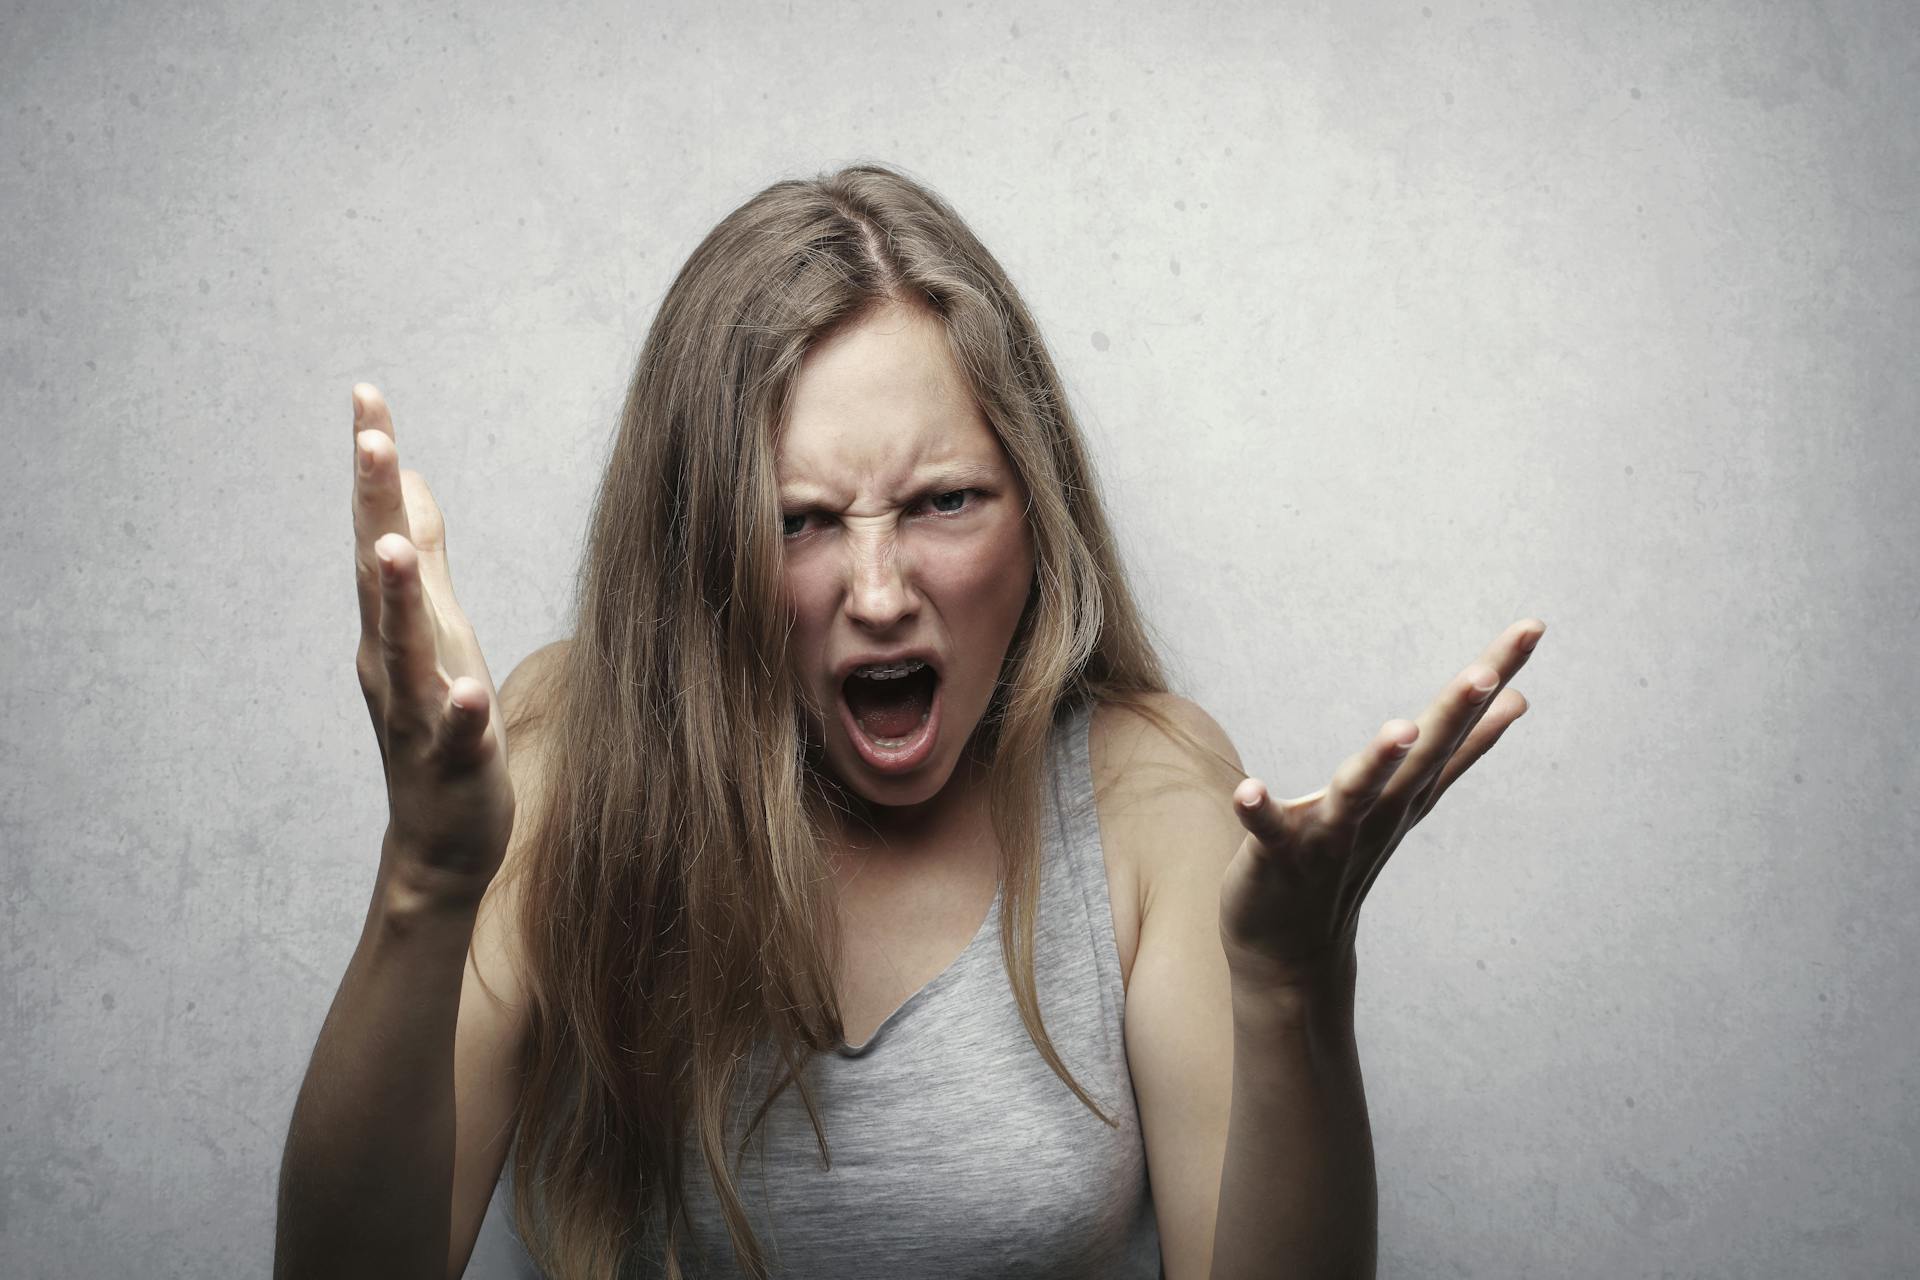 Angry woman shouting | Source: Pexels